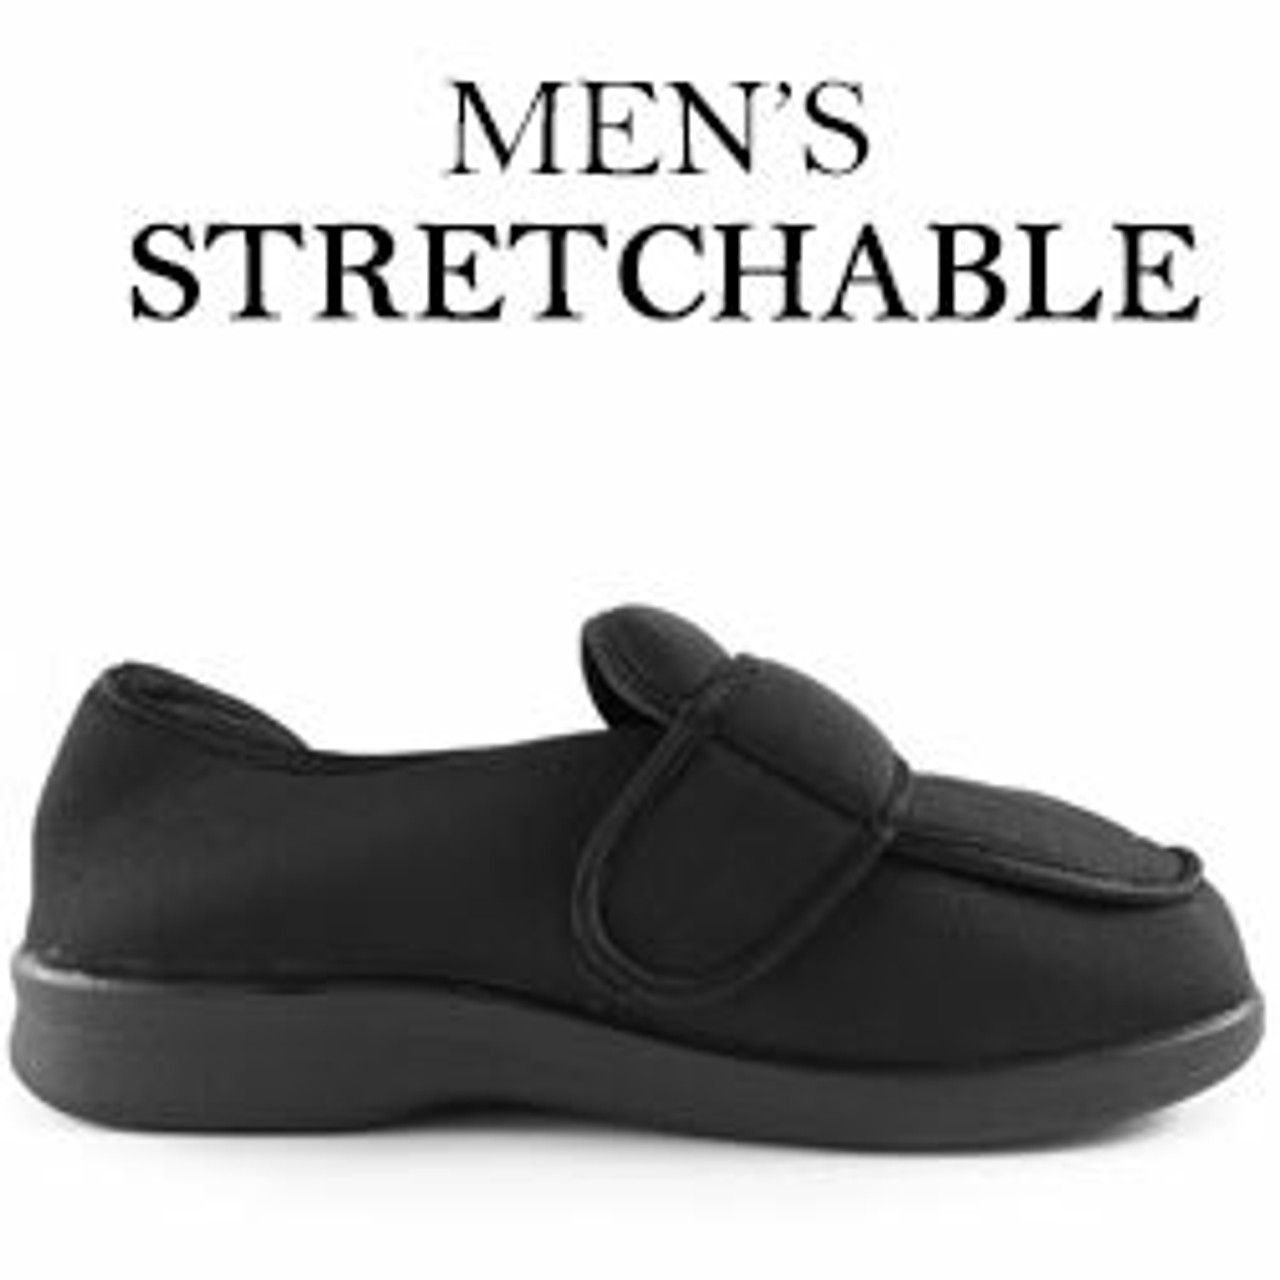 Stretchable Shoes For Men | Mens Stretch Fit Shoes